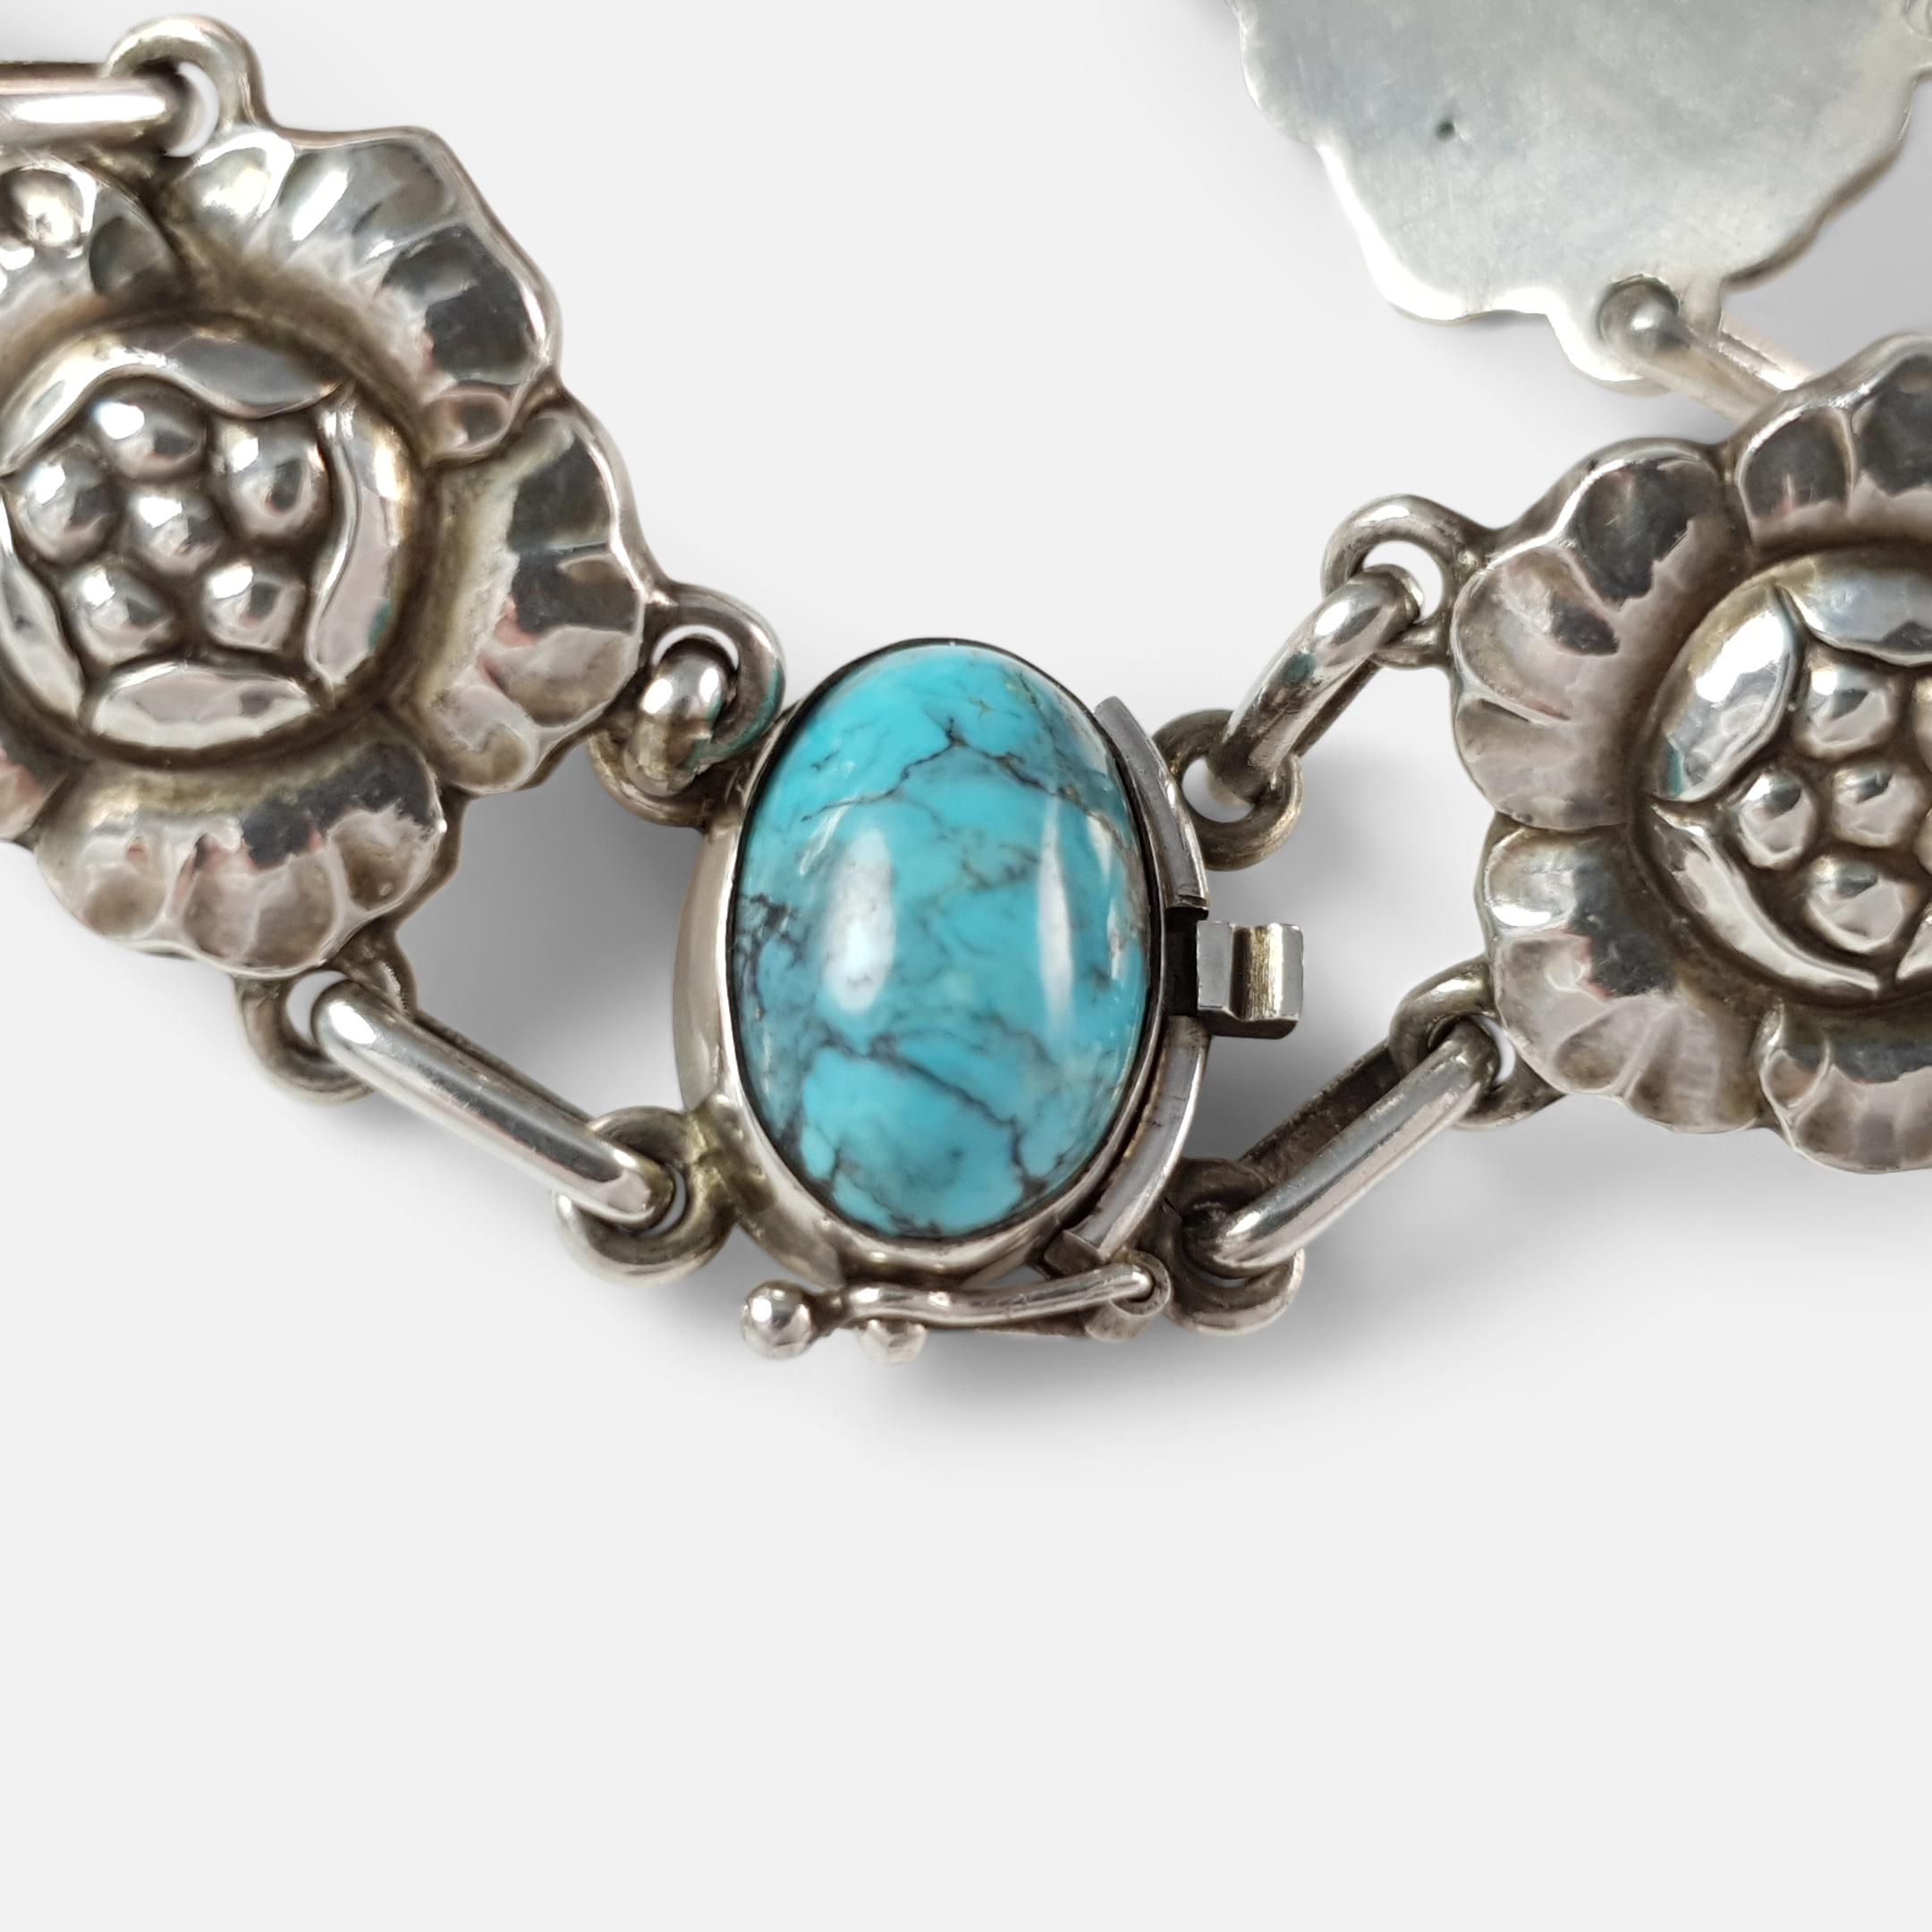 Georg Jensen Silver & Turquoise Cabochon 